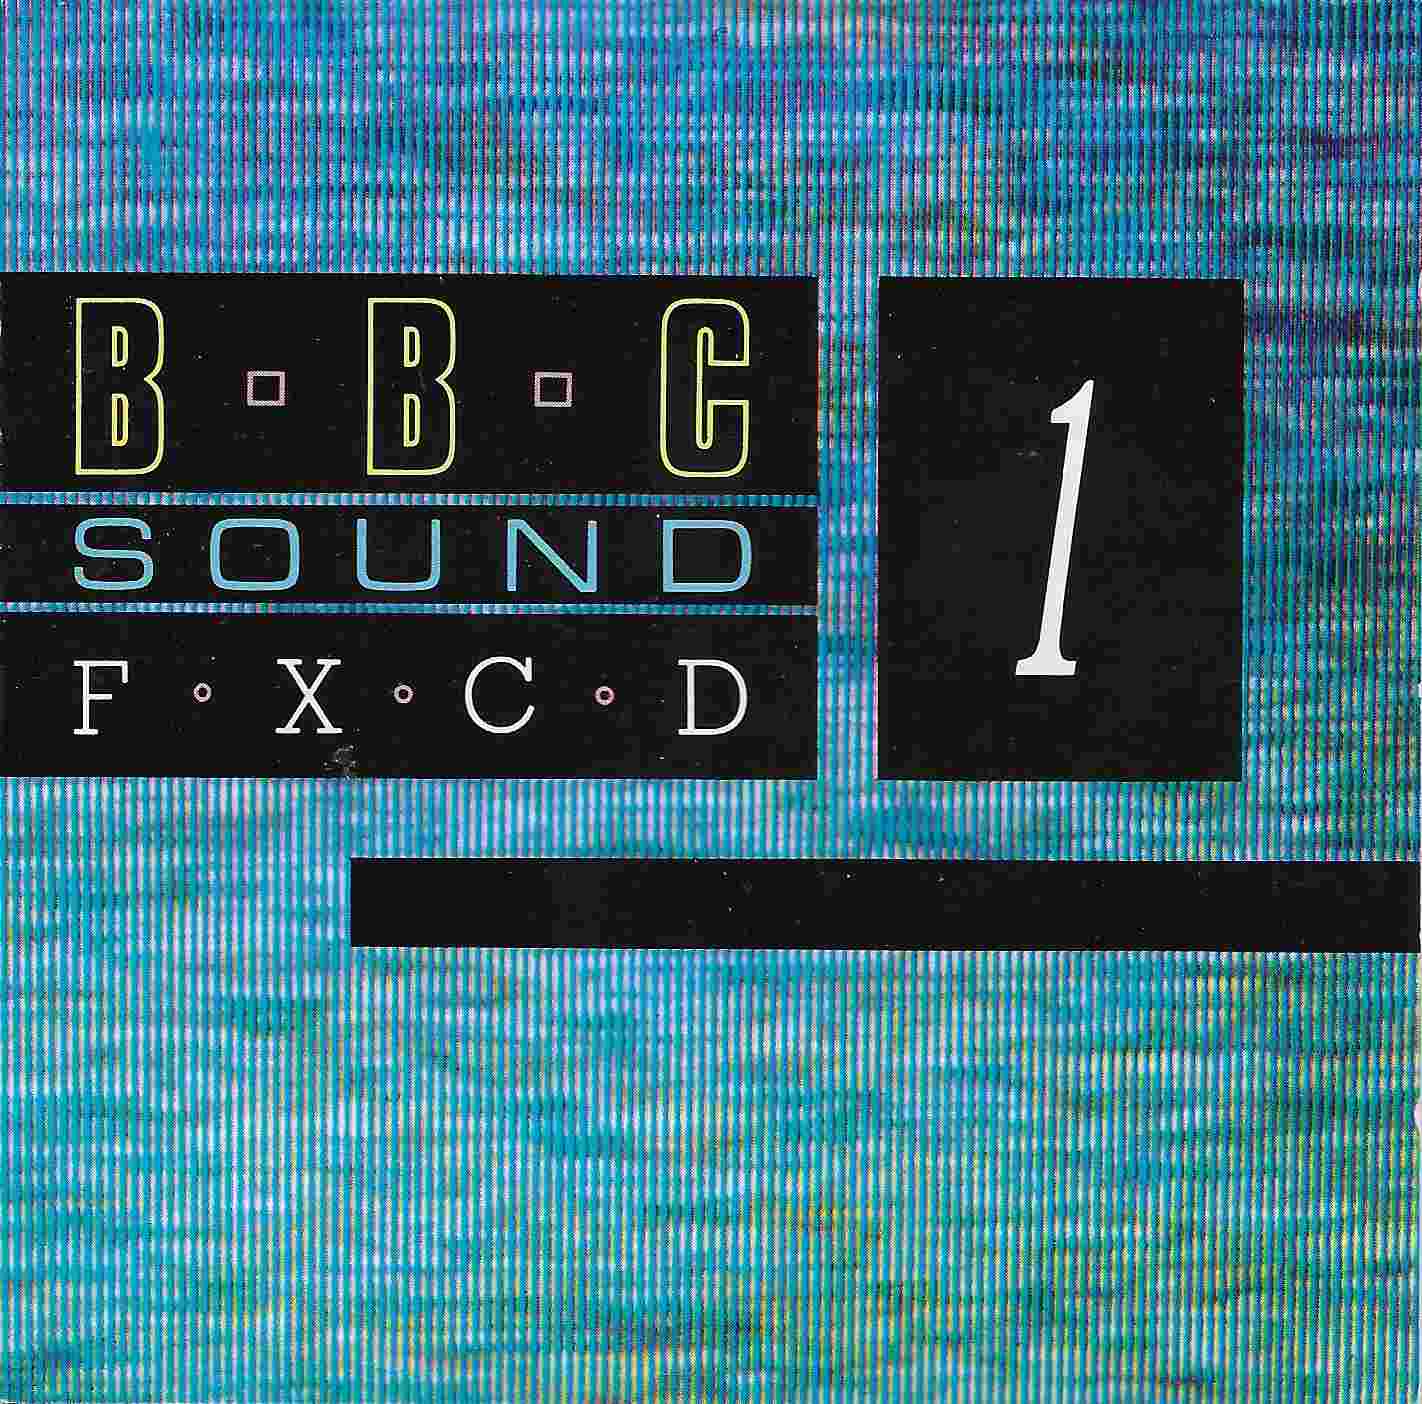 Picture of BBC sound effects by artist Various from the BBC cds - Records and Tapes library